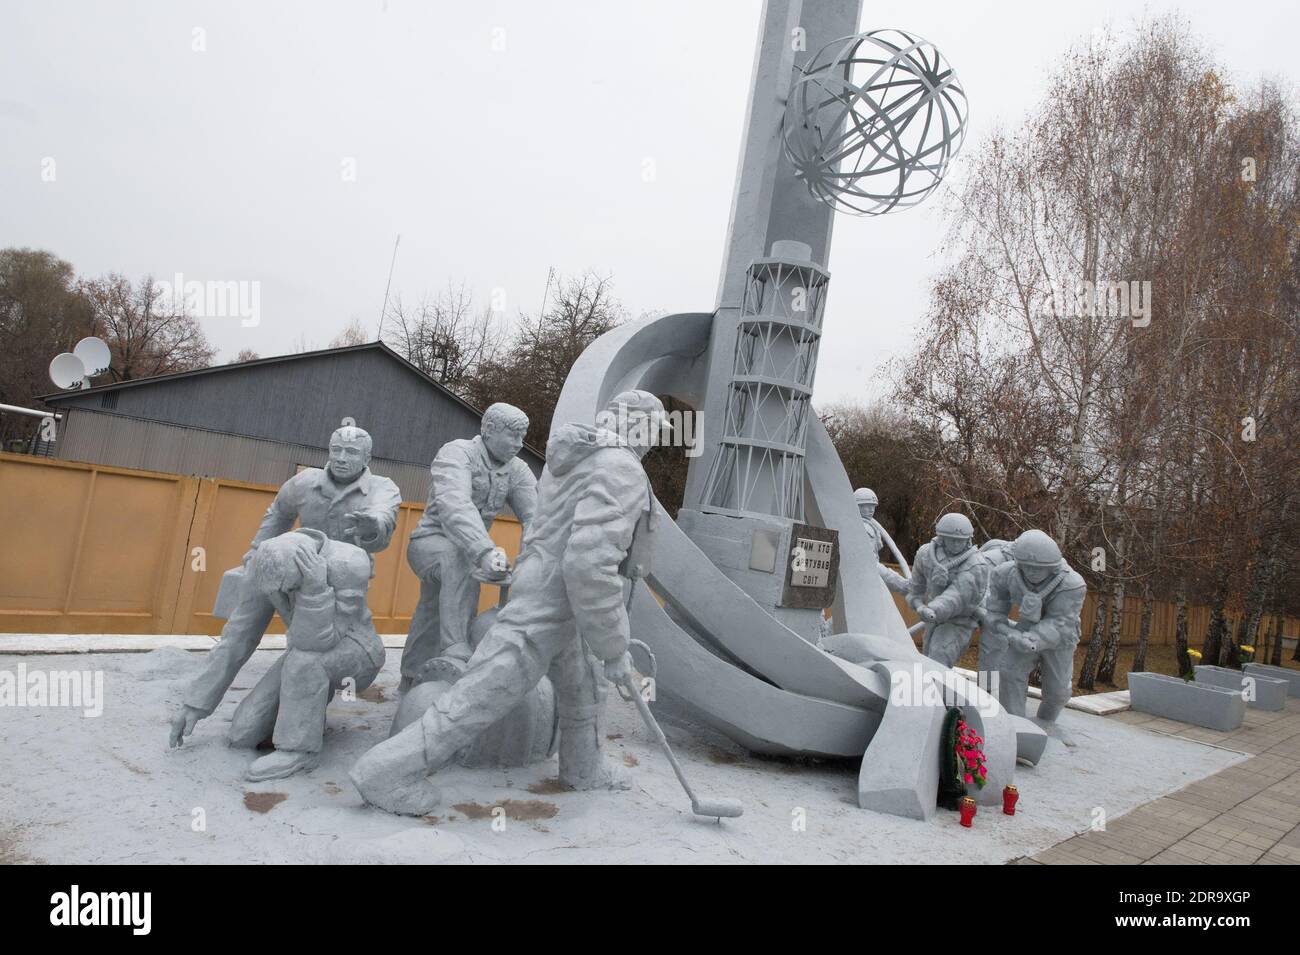 A memorial to the first victims (firemen) of the nuclear disaster in Chernobyl. Chernobyl in November 2015. The Chernobyl disaster (also referred to as the Chernobyl accident or simply Chernobyl) was a catastrophic nuclear accident that occurred on 26 April 1986 at the Chernobyl Nuclear Power Plant in the town of Pripyat, in Ukraine (then officially the Ukrainian SSR), which was under the direct jurisdiction of the central authorities of the Soviet Union. An explosion and fire released large quantities of radioactive particles into the atmosphere, which spread over much of the western USSR and Stock Photo